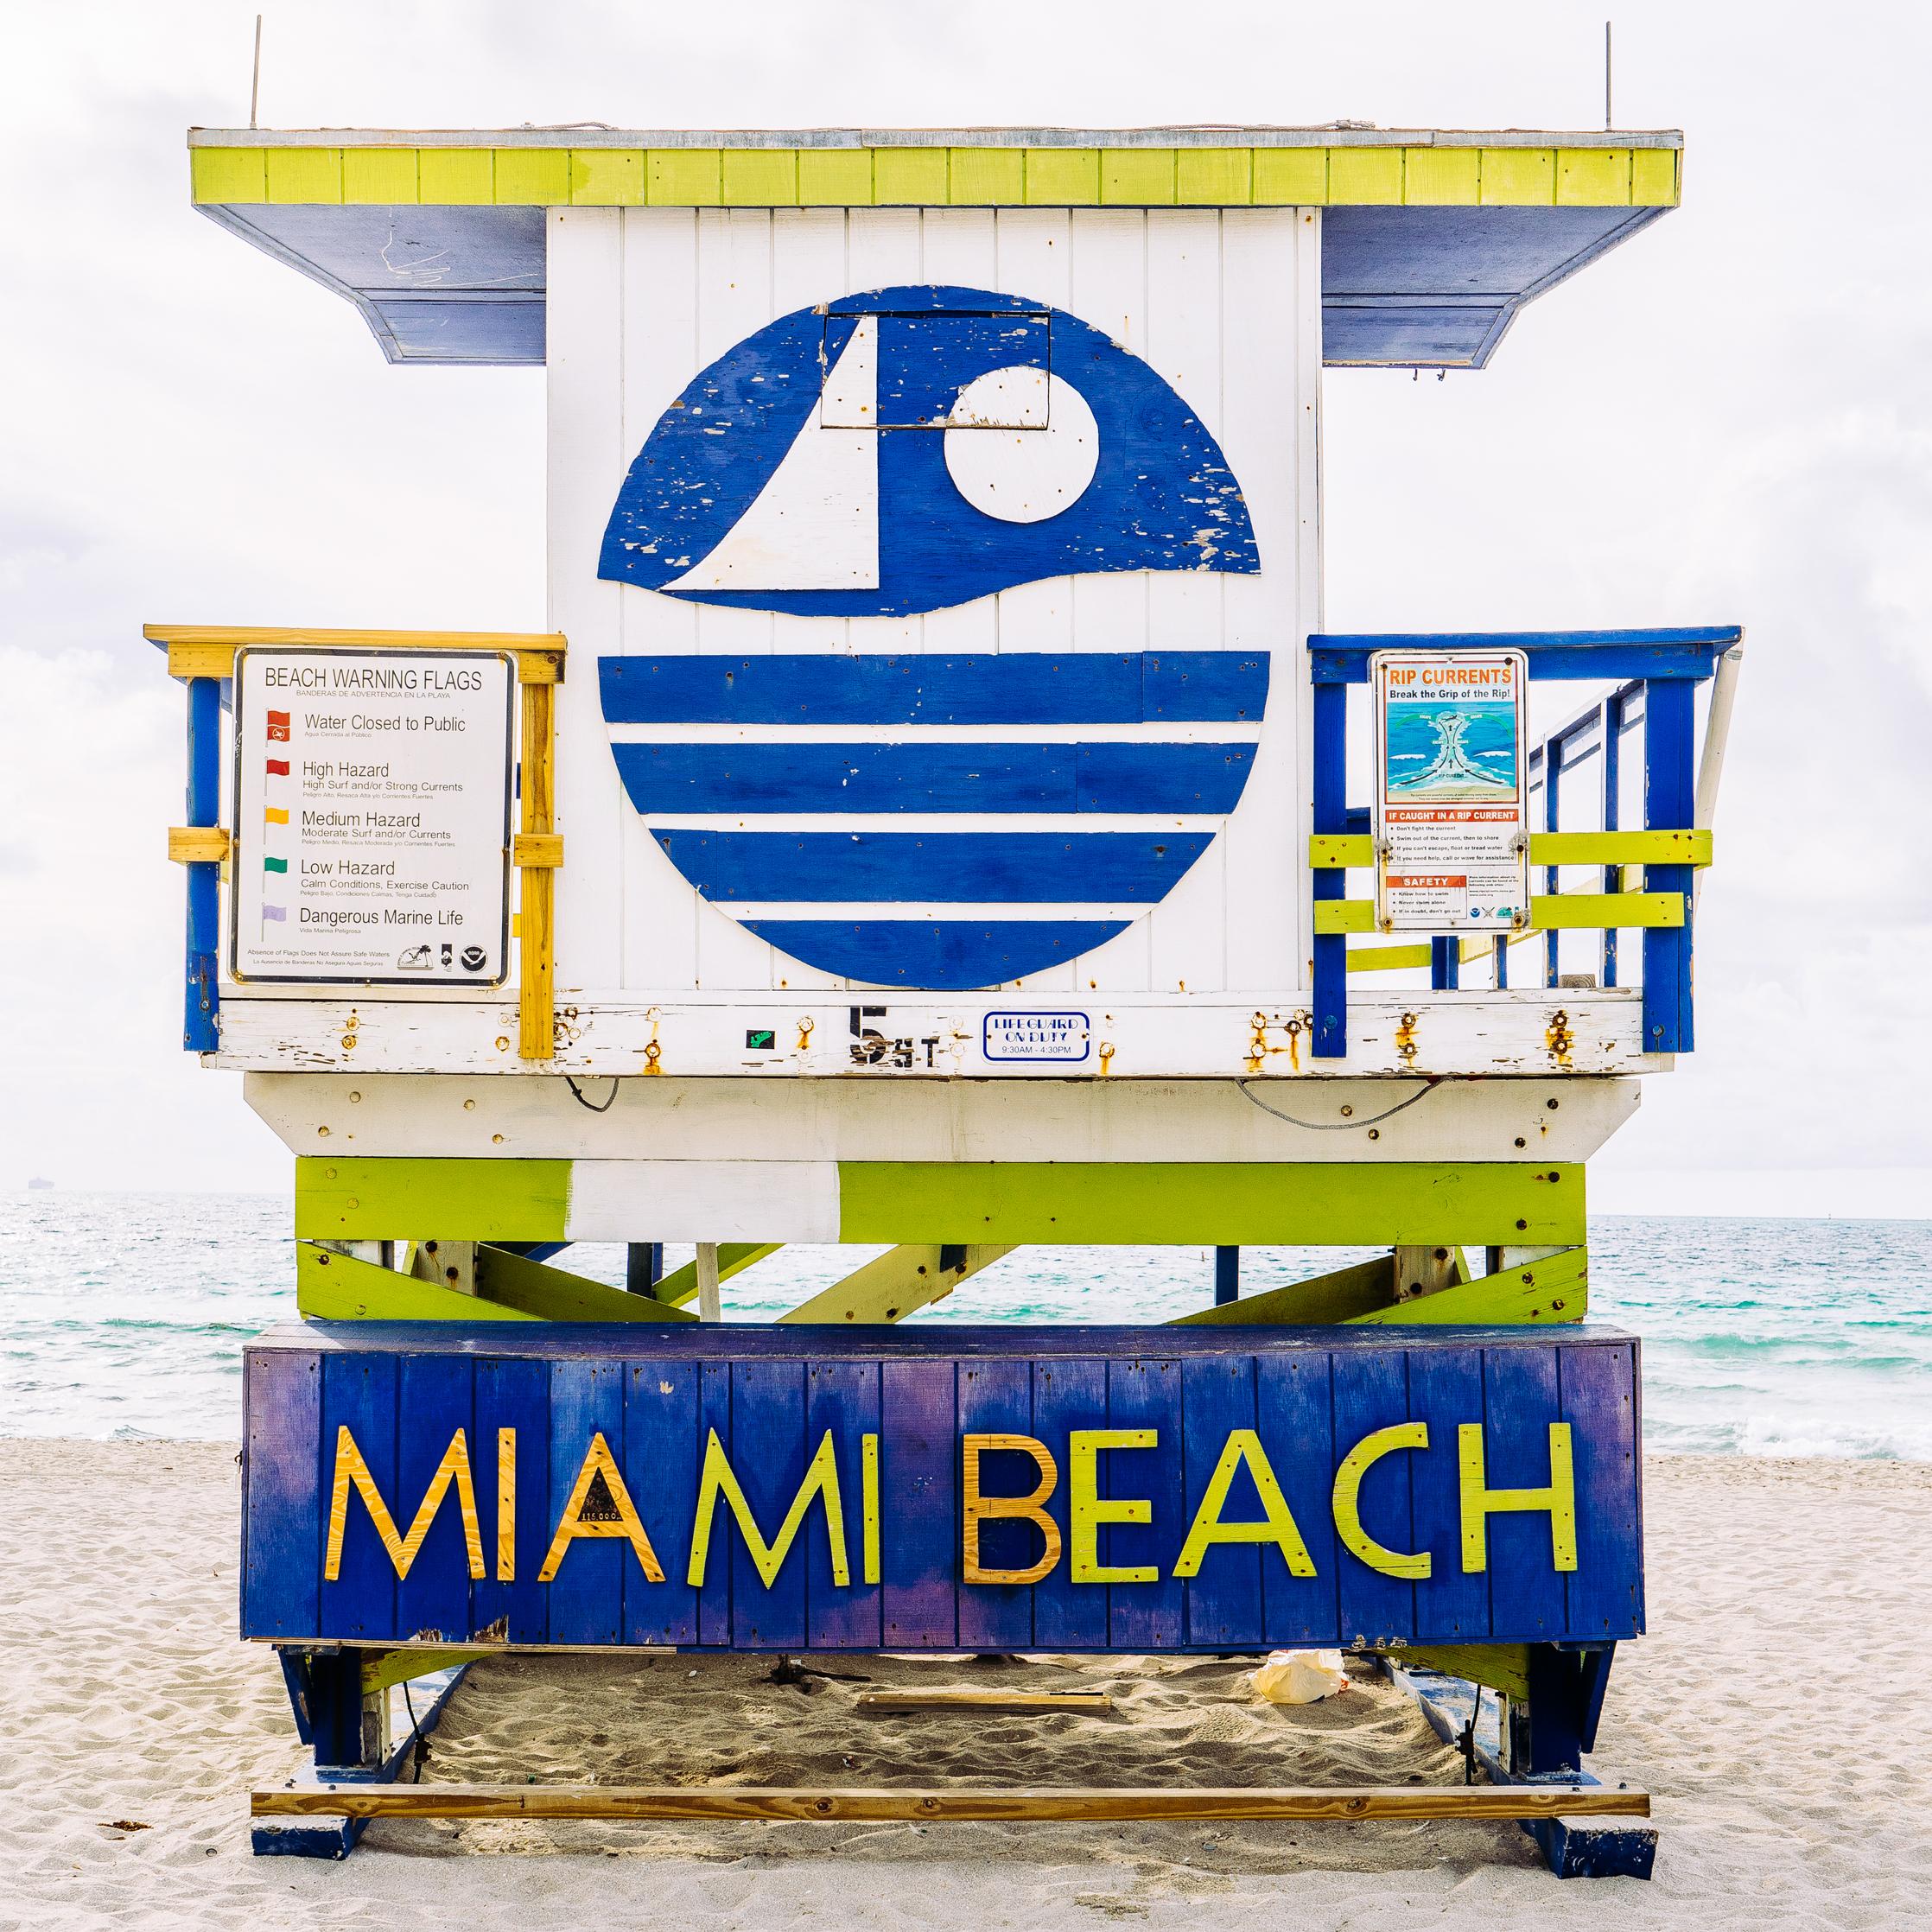 Peter Mendelson Color Photograph - "Miami Beach Lifeguard Stand - Rr View, " Contemporary Photograph, 30" x 30"